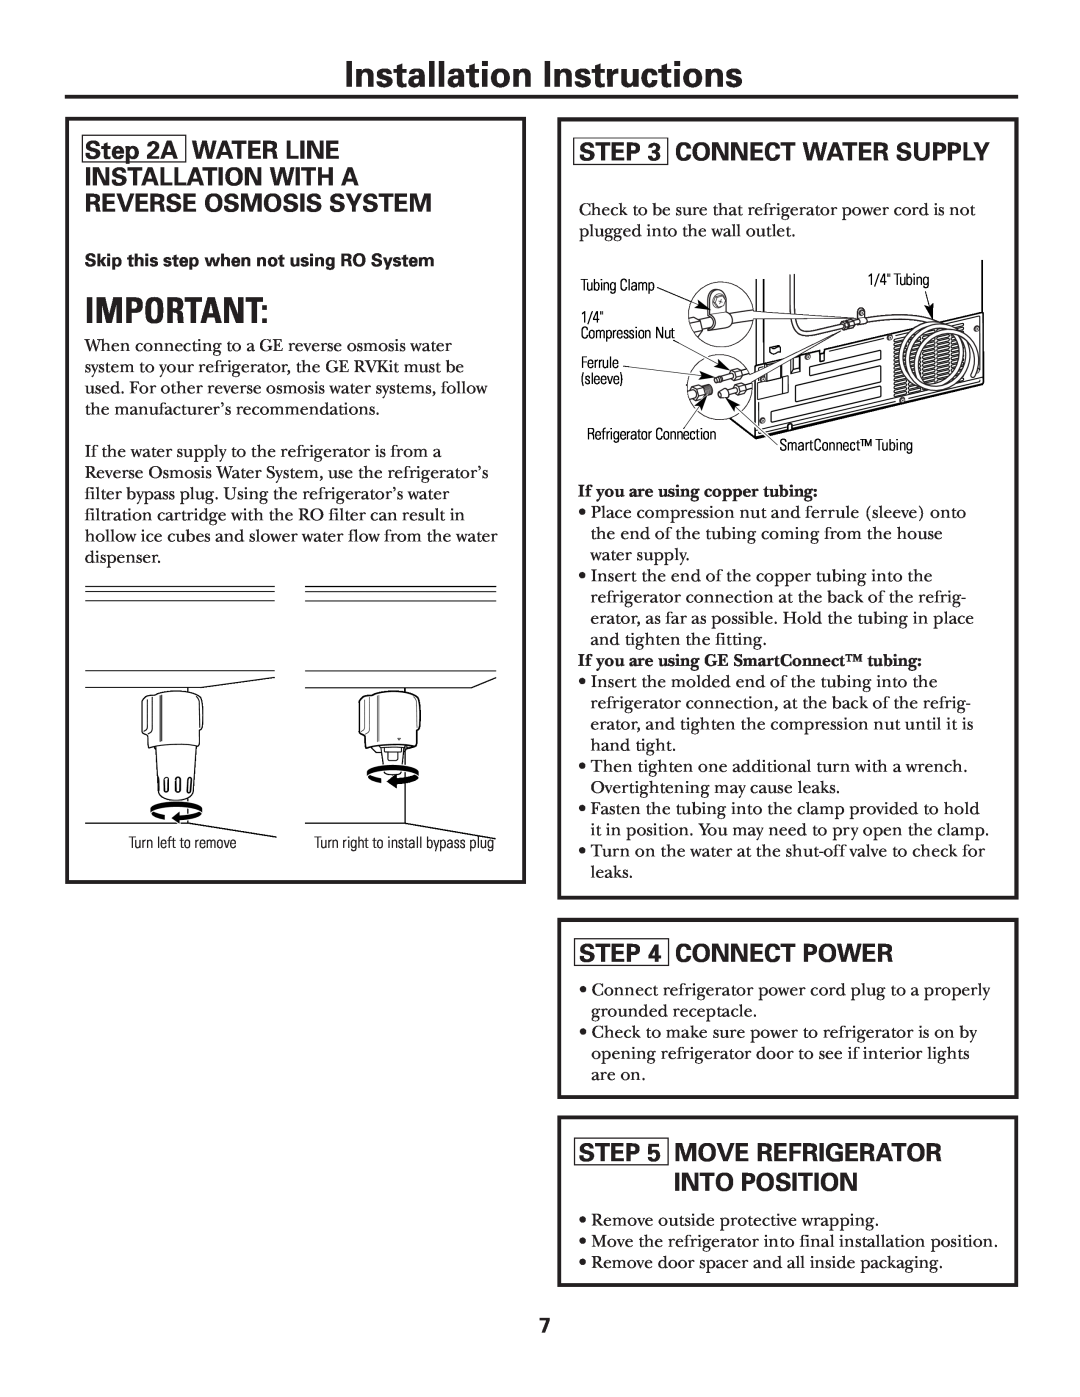 GE ZFSB23D SS installation instructions A Water Line, Connect Water Supply, Connect Power, Move Refrigerator Into Position 